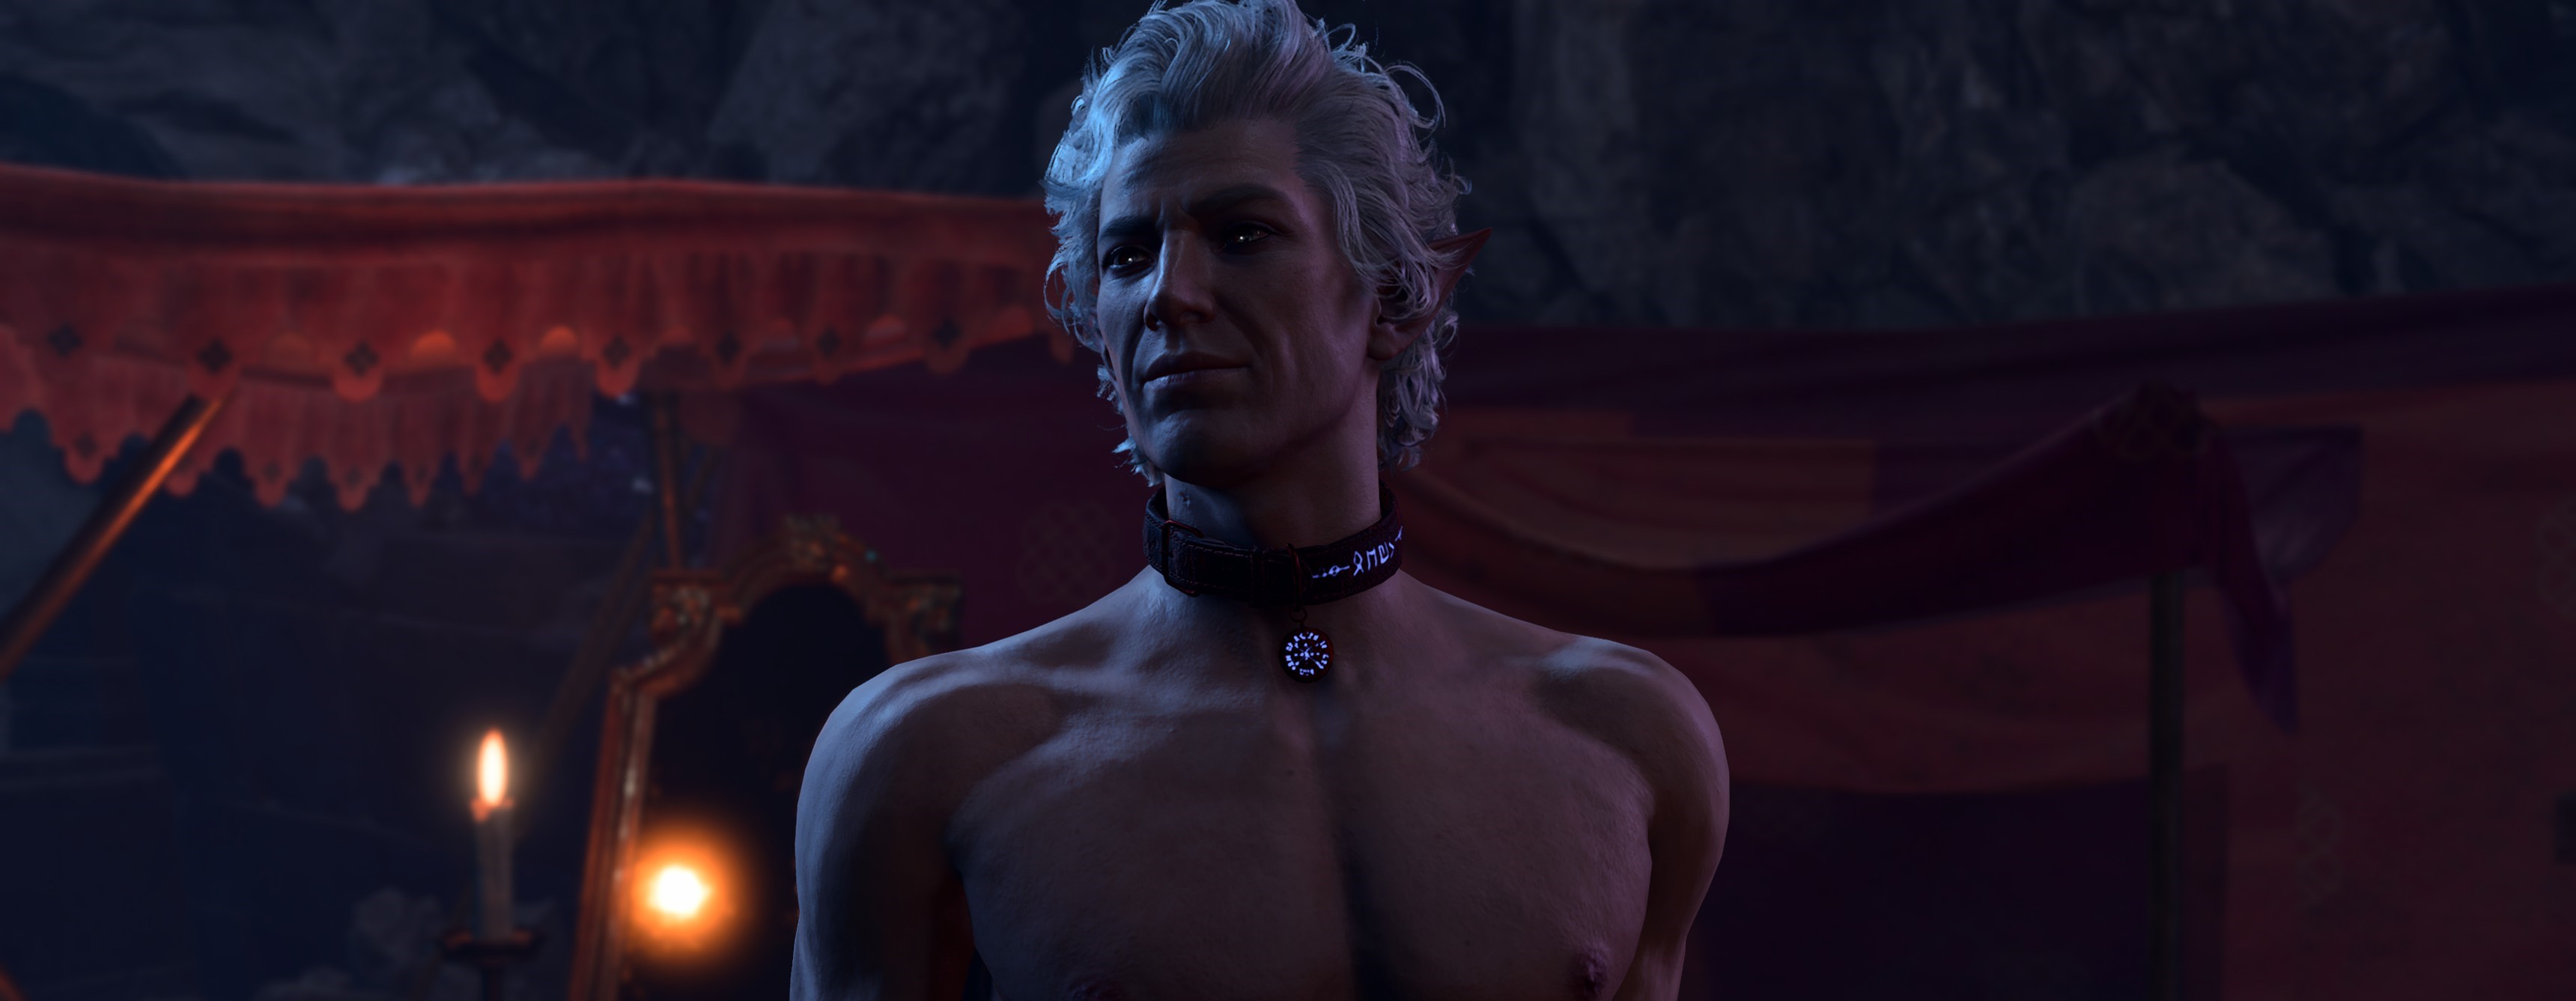 General 3440x1337 Baldur's Gate 3 video games Astarion Dungeons & Dragons chests video game men video game characters CGI video game art screen shot shirtless collarbone closed mouth short hair white hair looking away collar